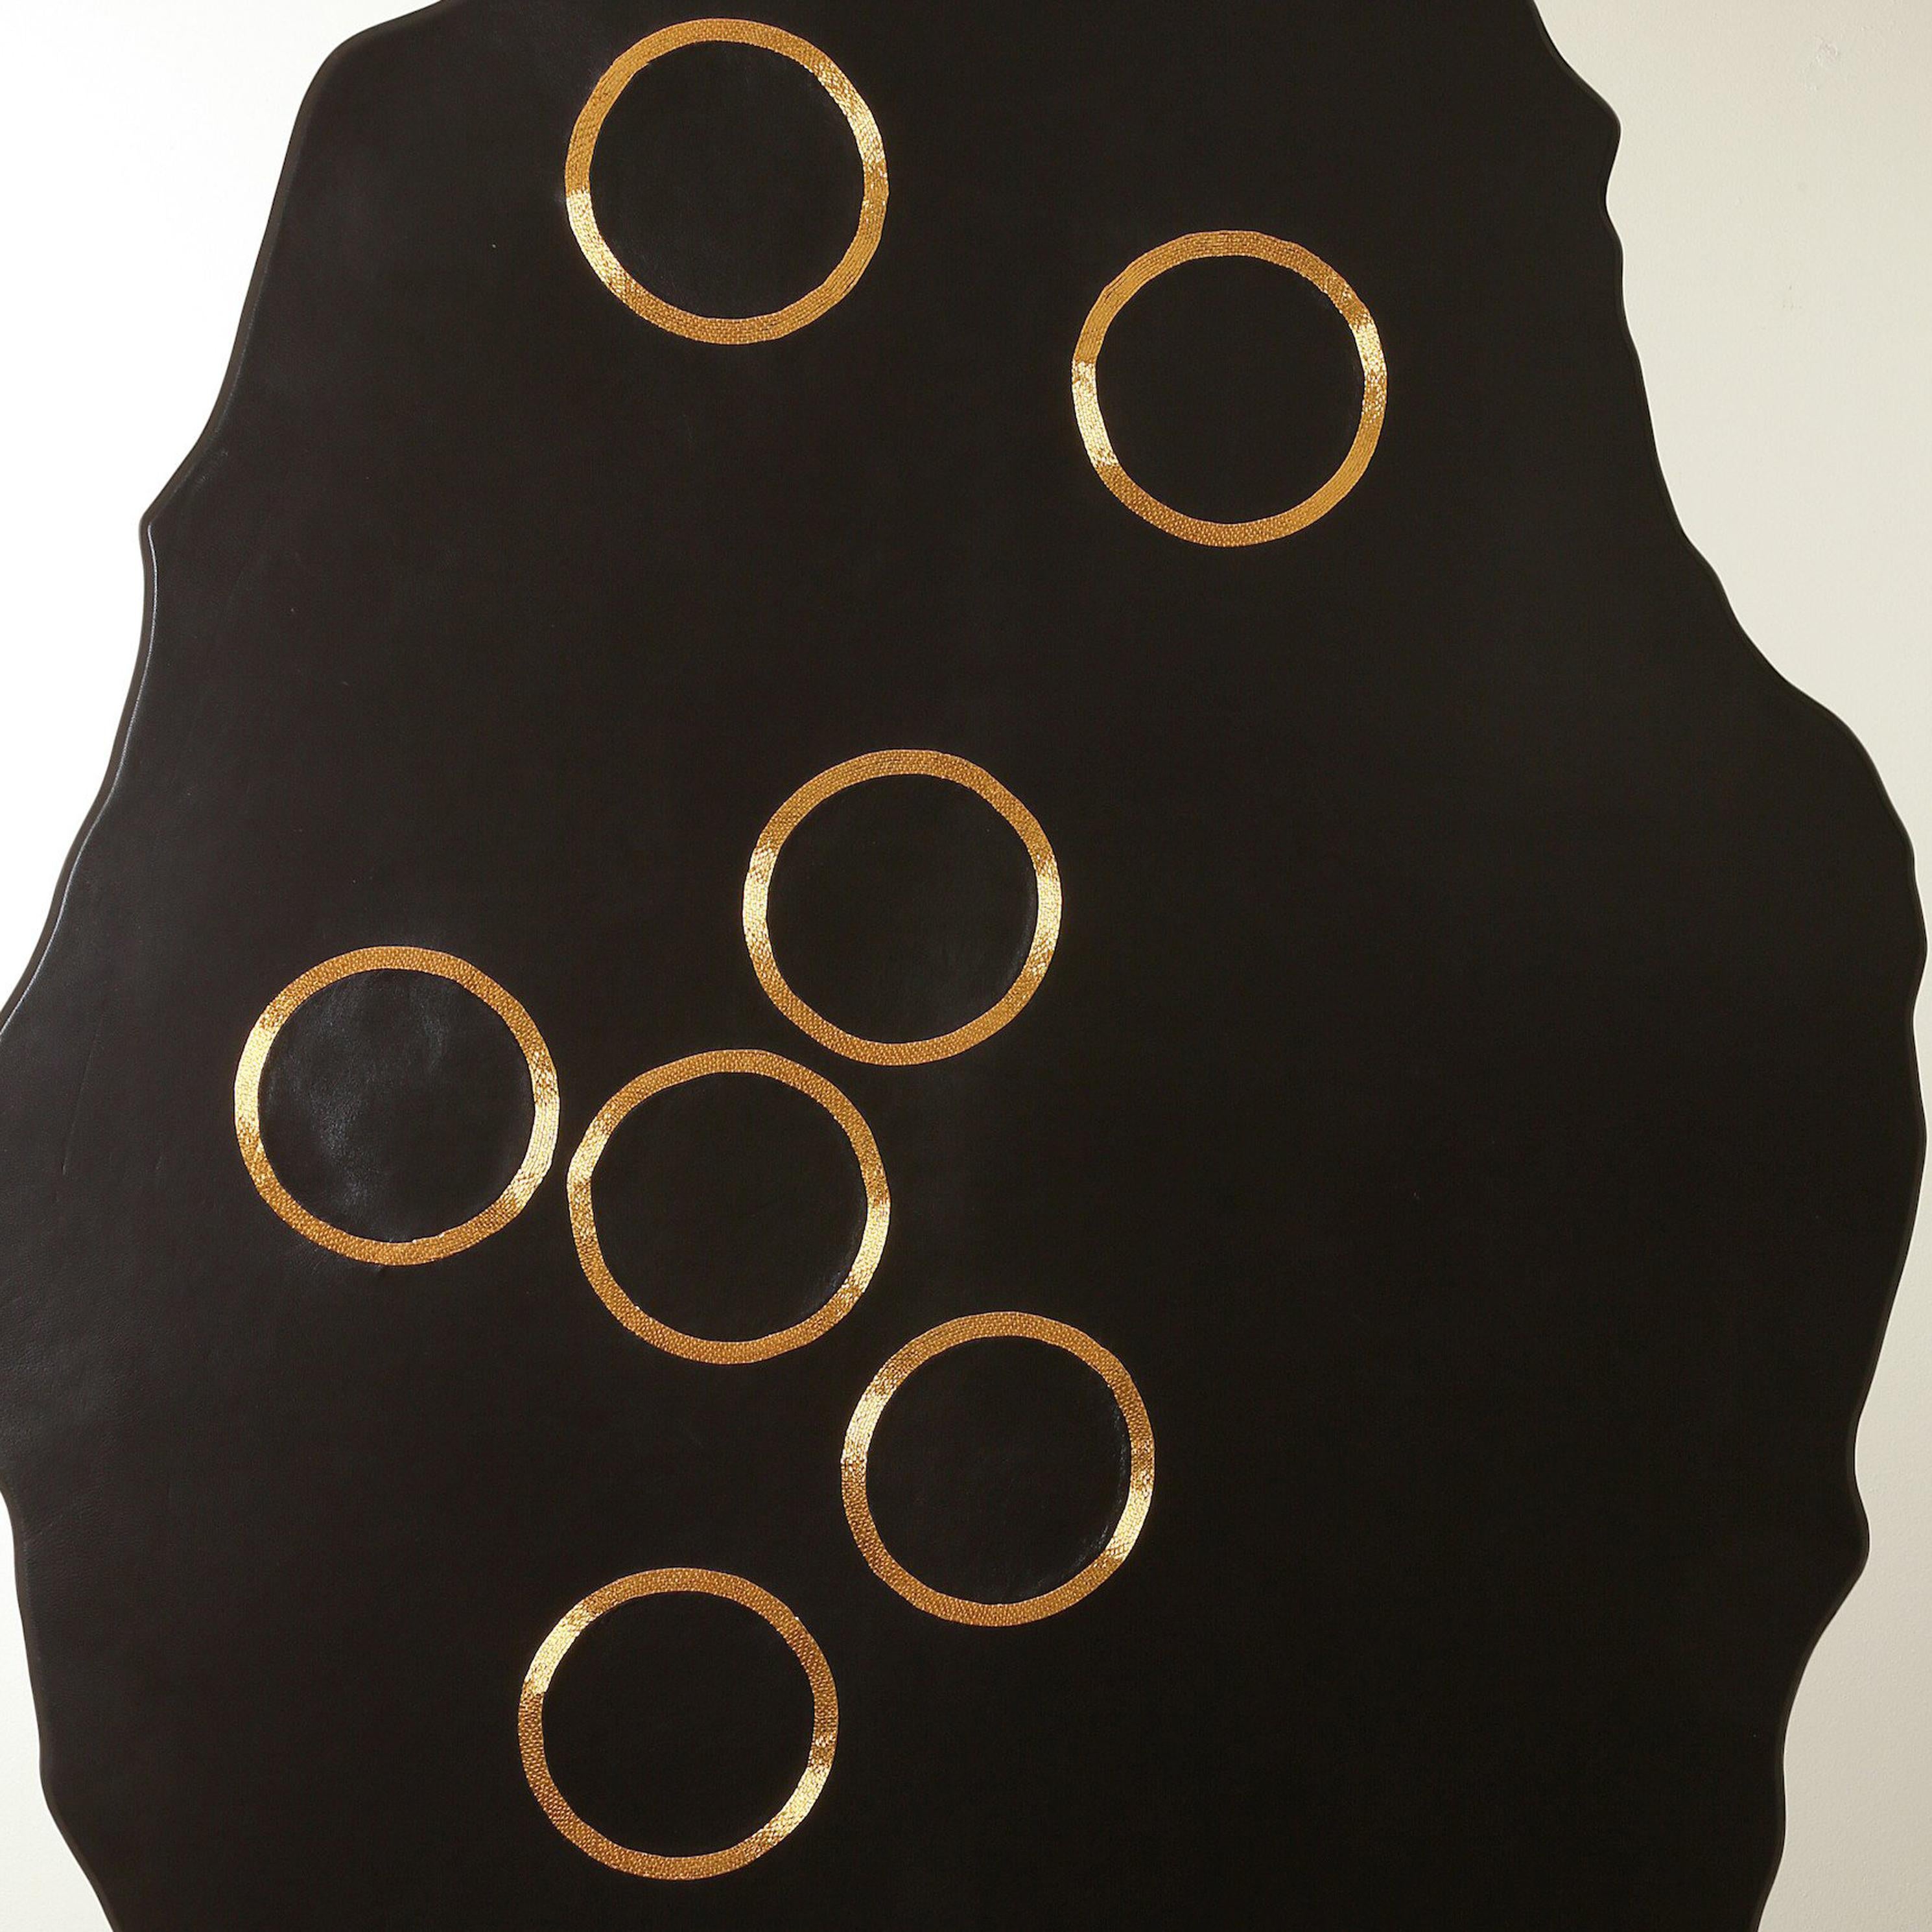 Chance of Seven - leather and gold wall mounted panel by Anita Carnell For Sale 2